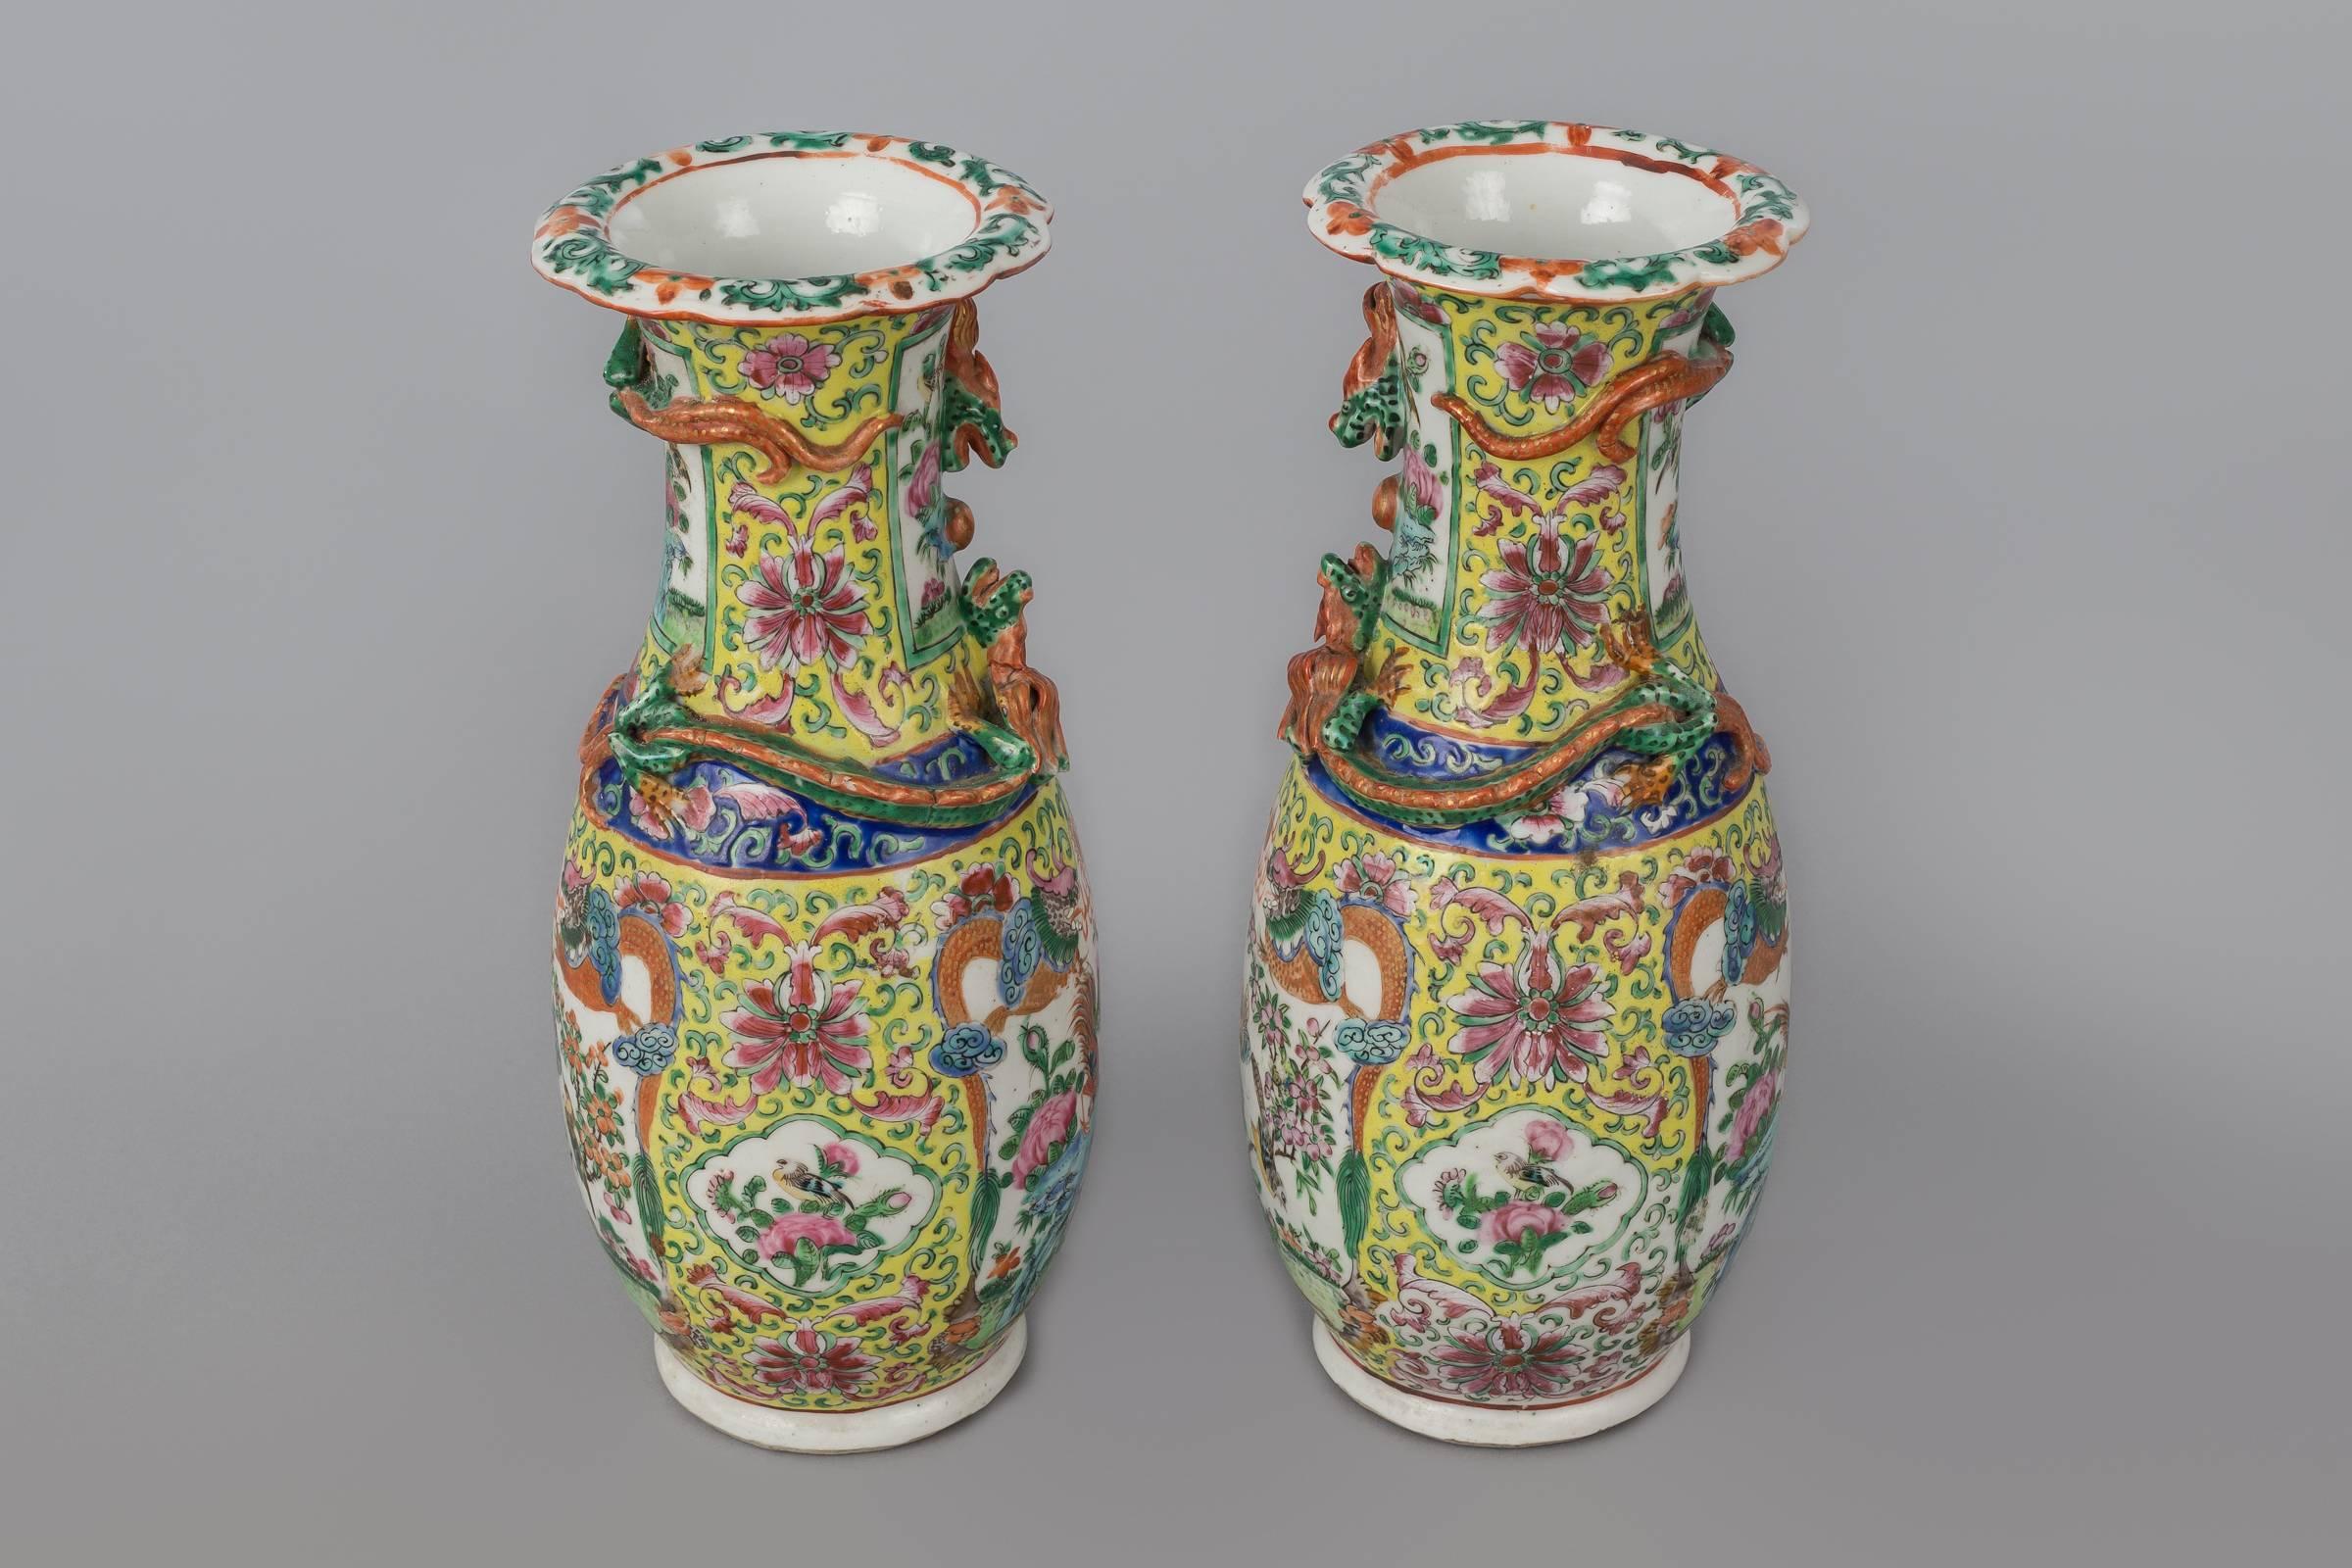 Air Chinese export porcelain polychrome baluster-shaped open vases with scalloped rim, two dragons encircling the neck, two panels enclosing birds, butterflies and flowers framed by two dragons, done in yellow, cobalt blue, pinks, green and orange.